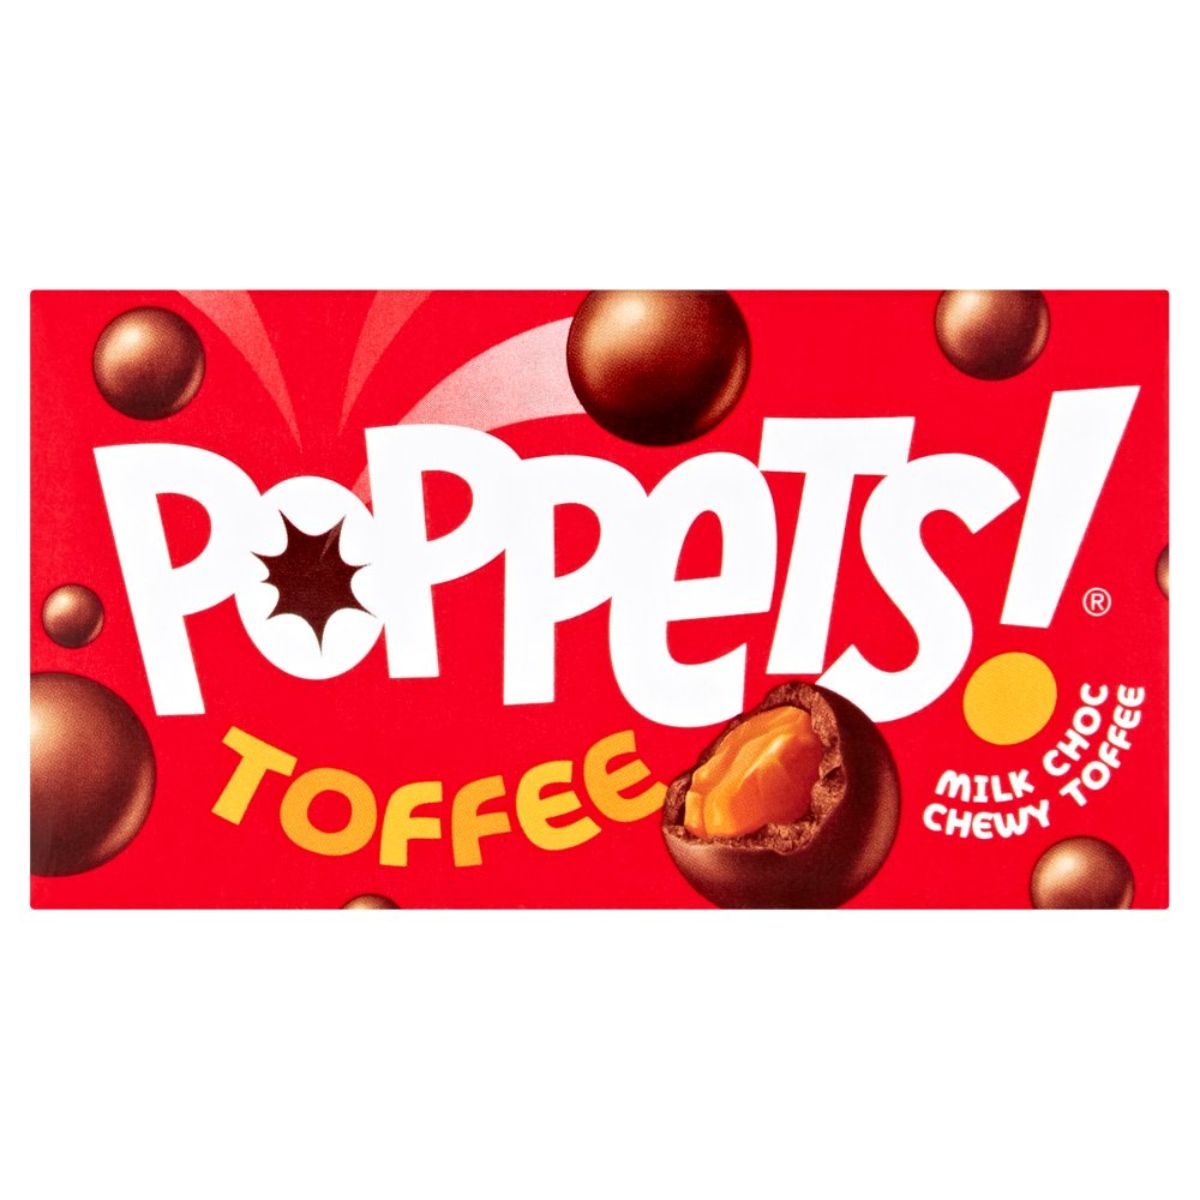 Paynes - Poppets Toffee Milk Choc Chewy Toffee - 39g toffee chocolate bar.